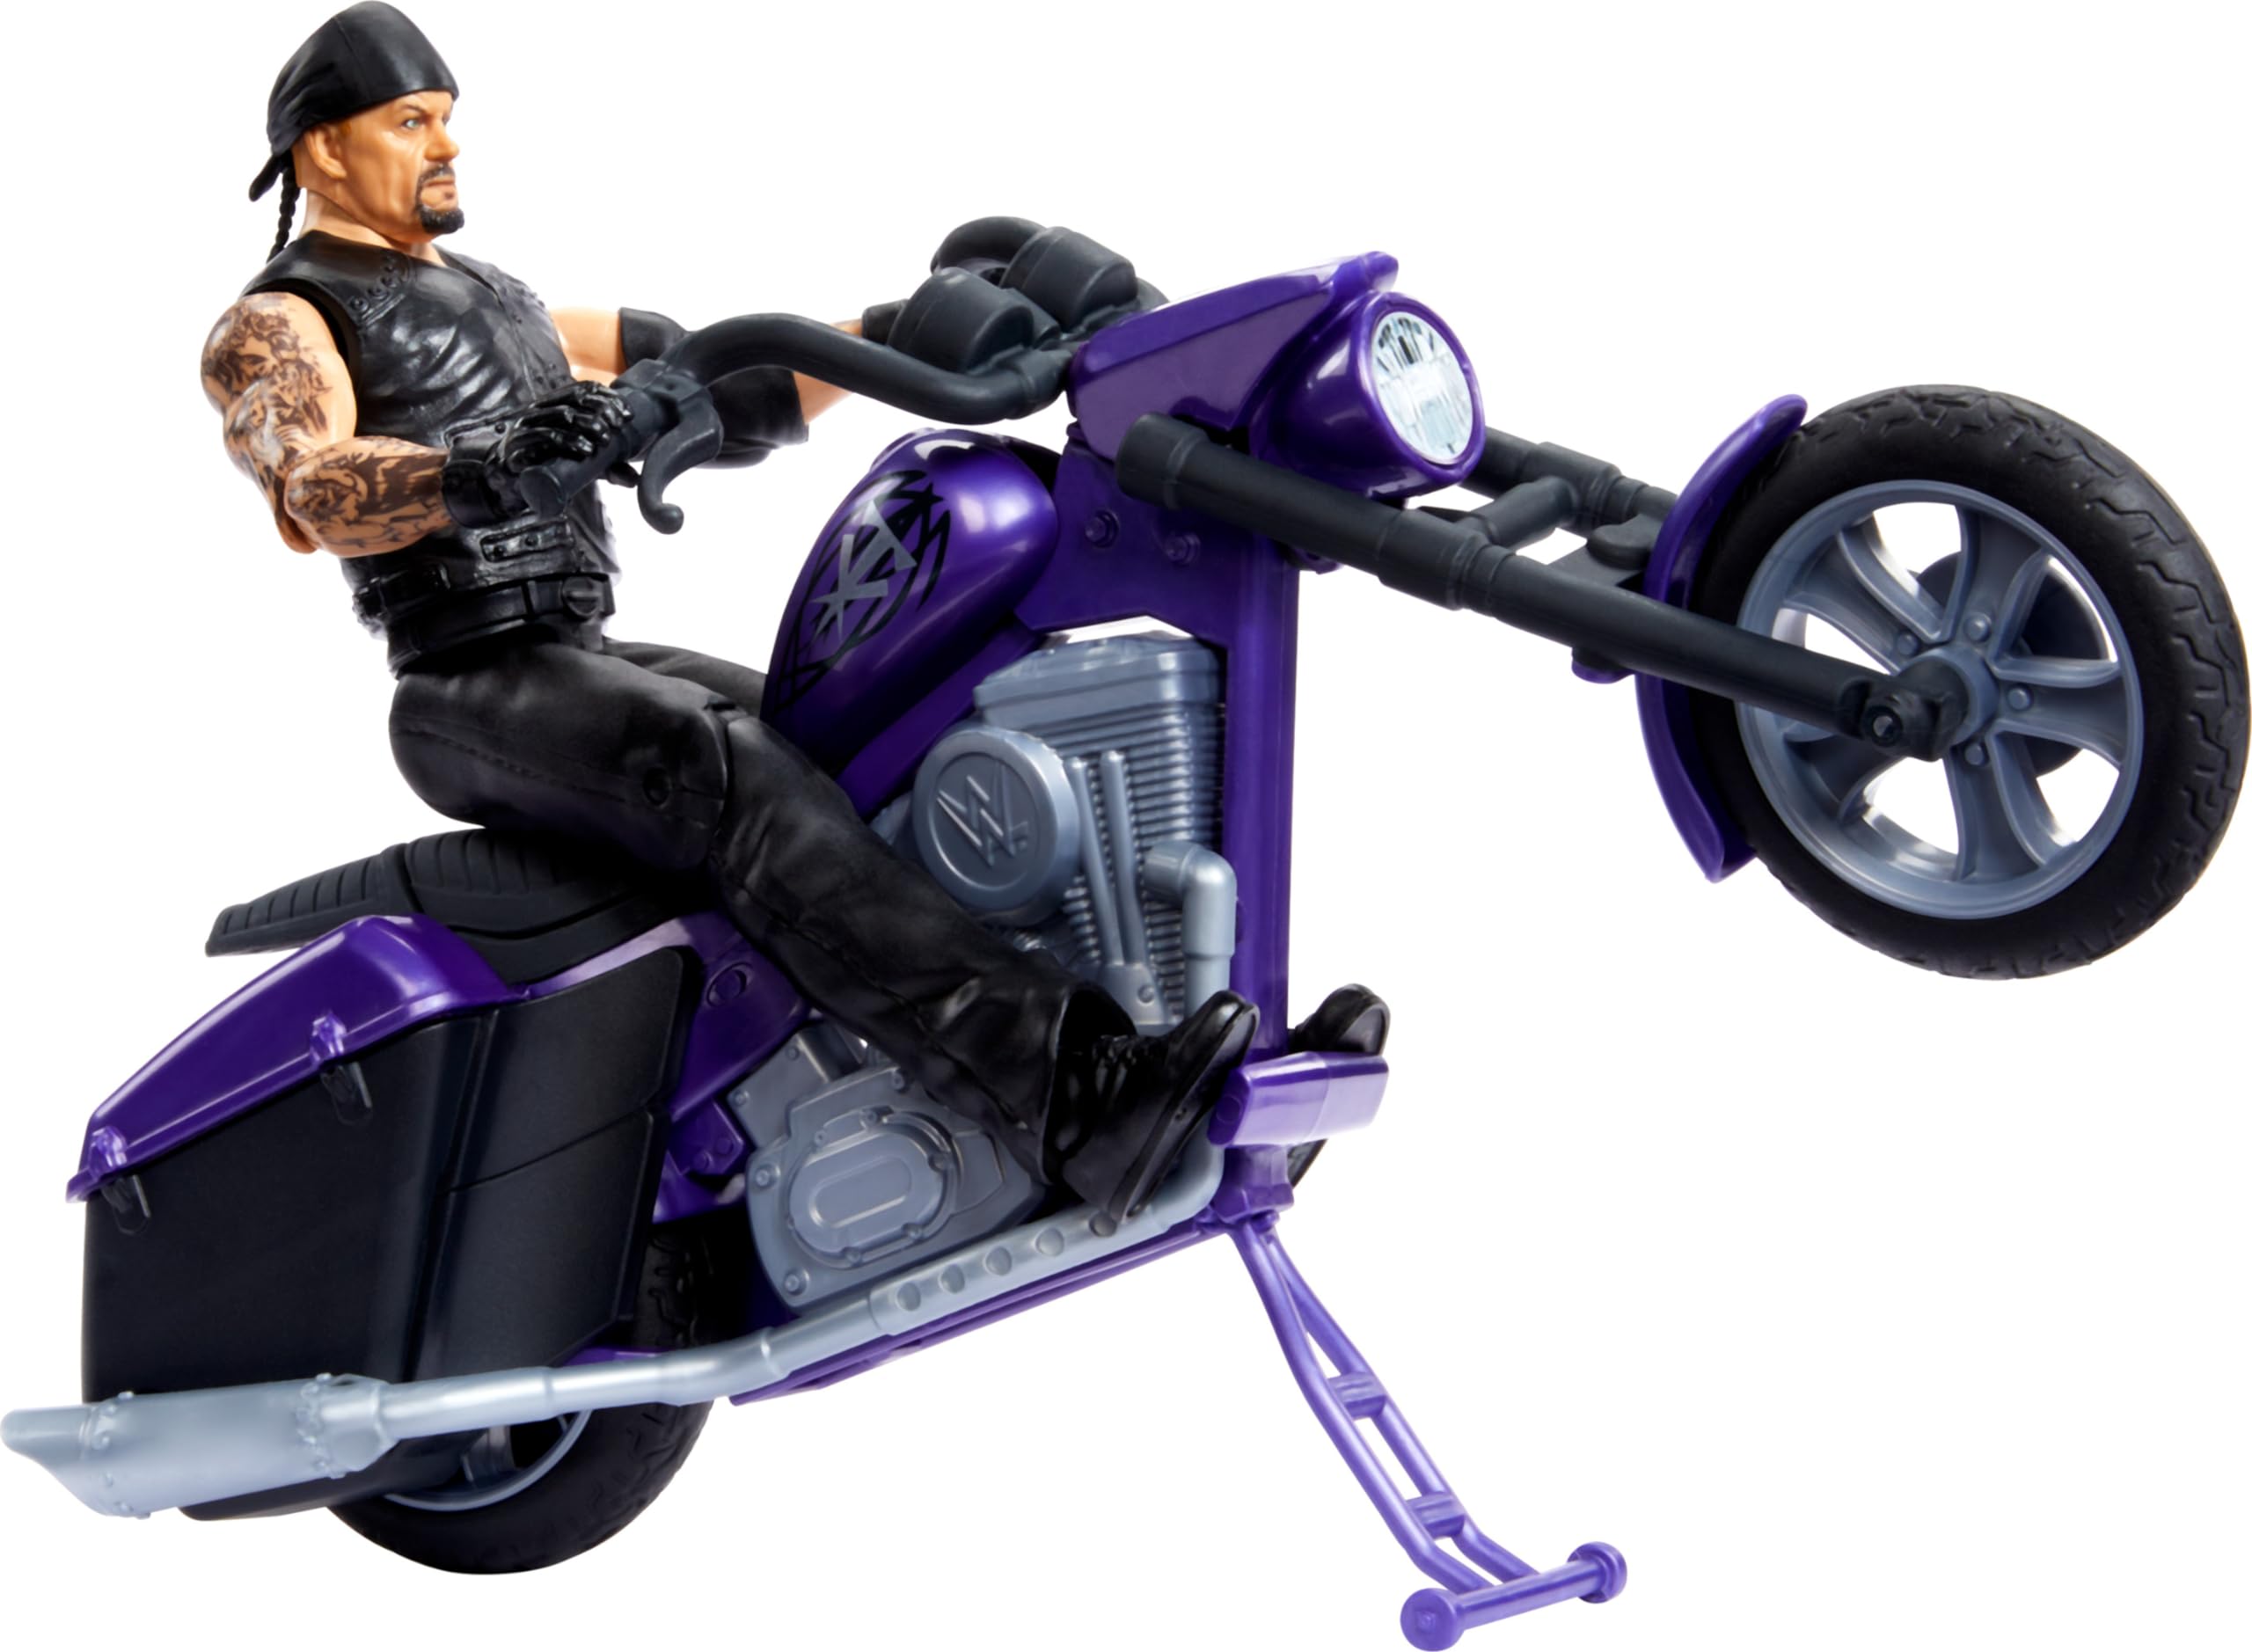 Mattel WWE Wrekkin' Action Figure & Toy Vehicle Set, Undertaker with Slamcycle Motorcycle with Lanching Action and Breakable Parts